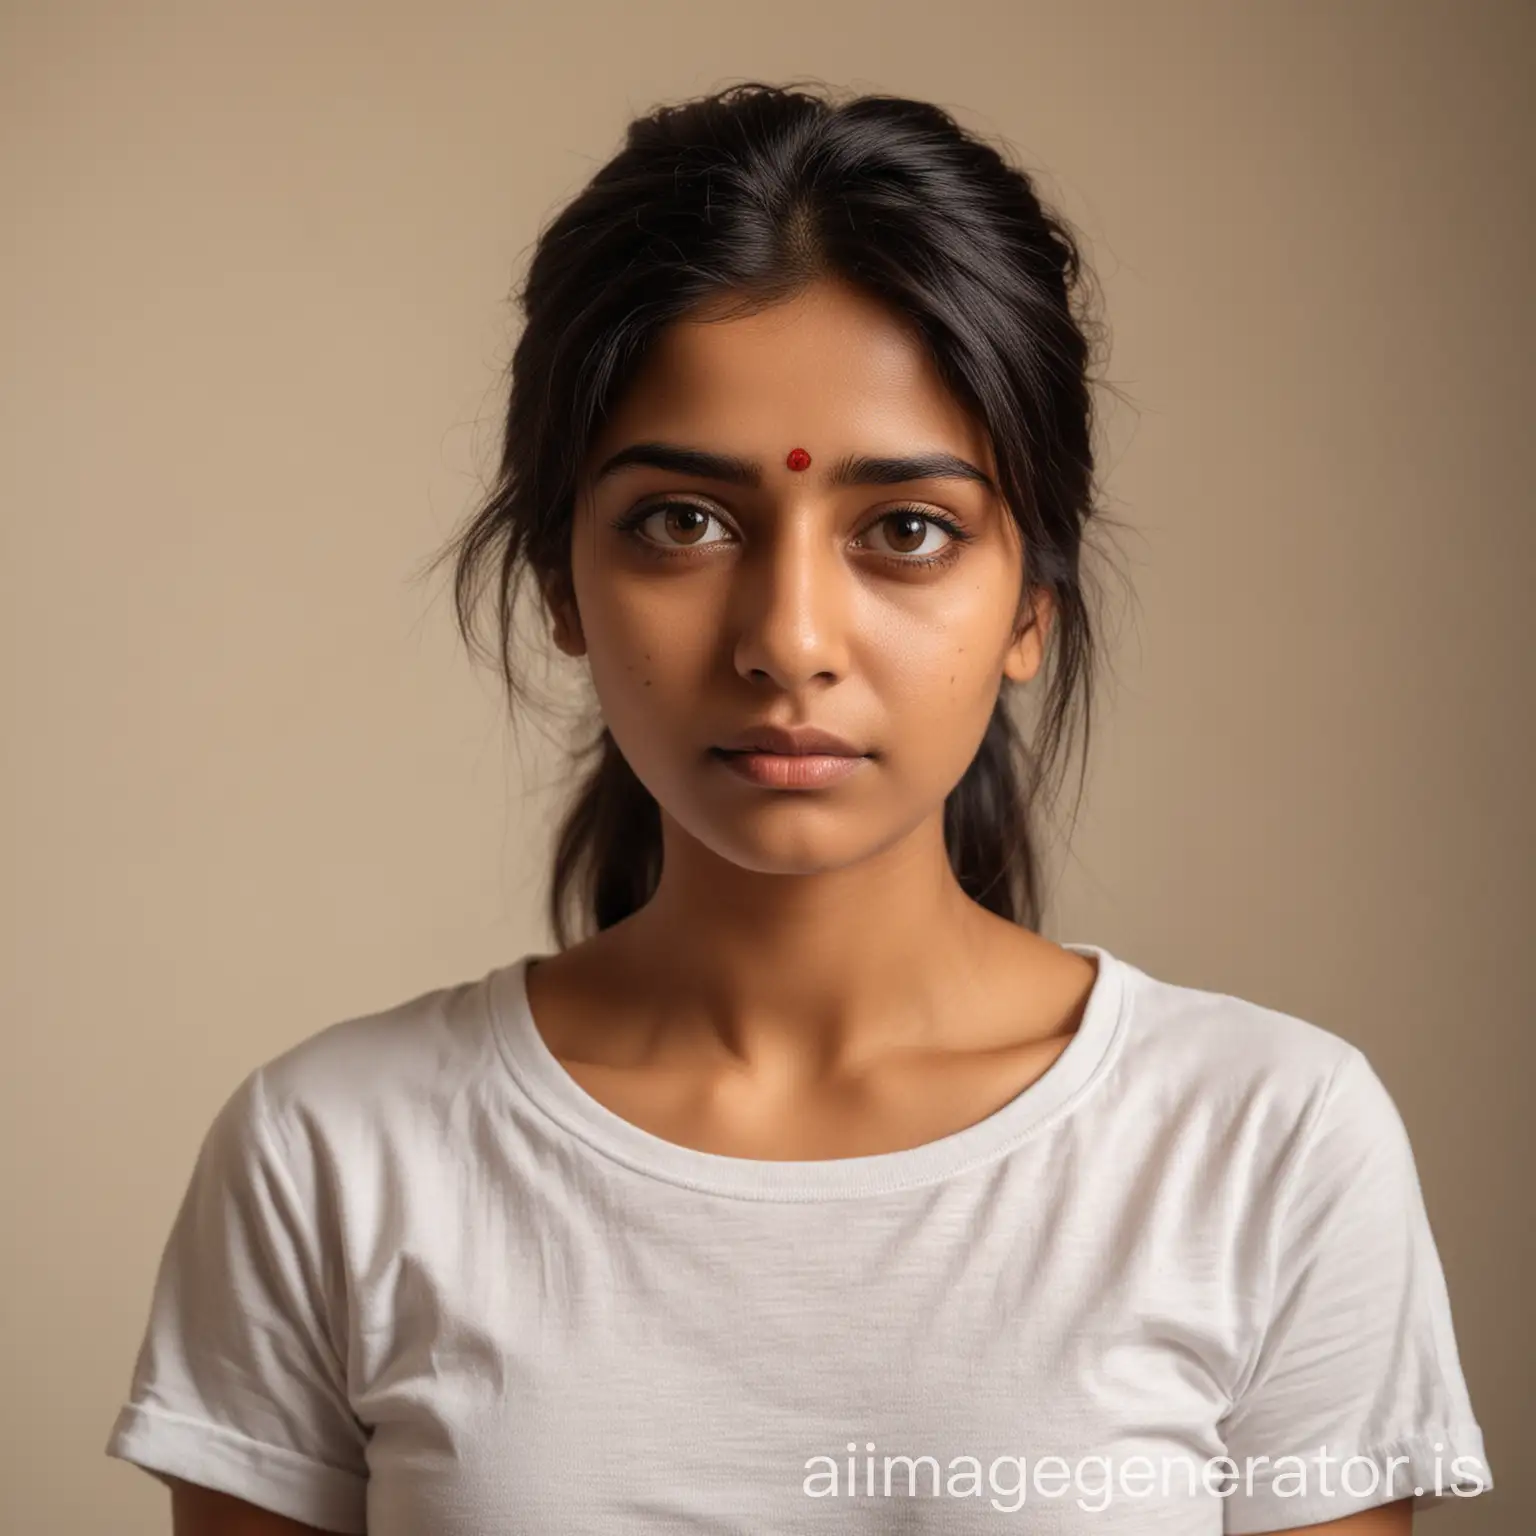 An Indian woman in a casual tshirt. Her skin tone is fair with brown eyes. Make her eyes look sad.